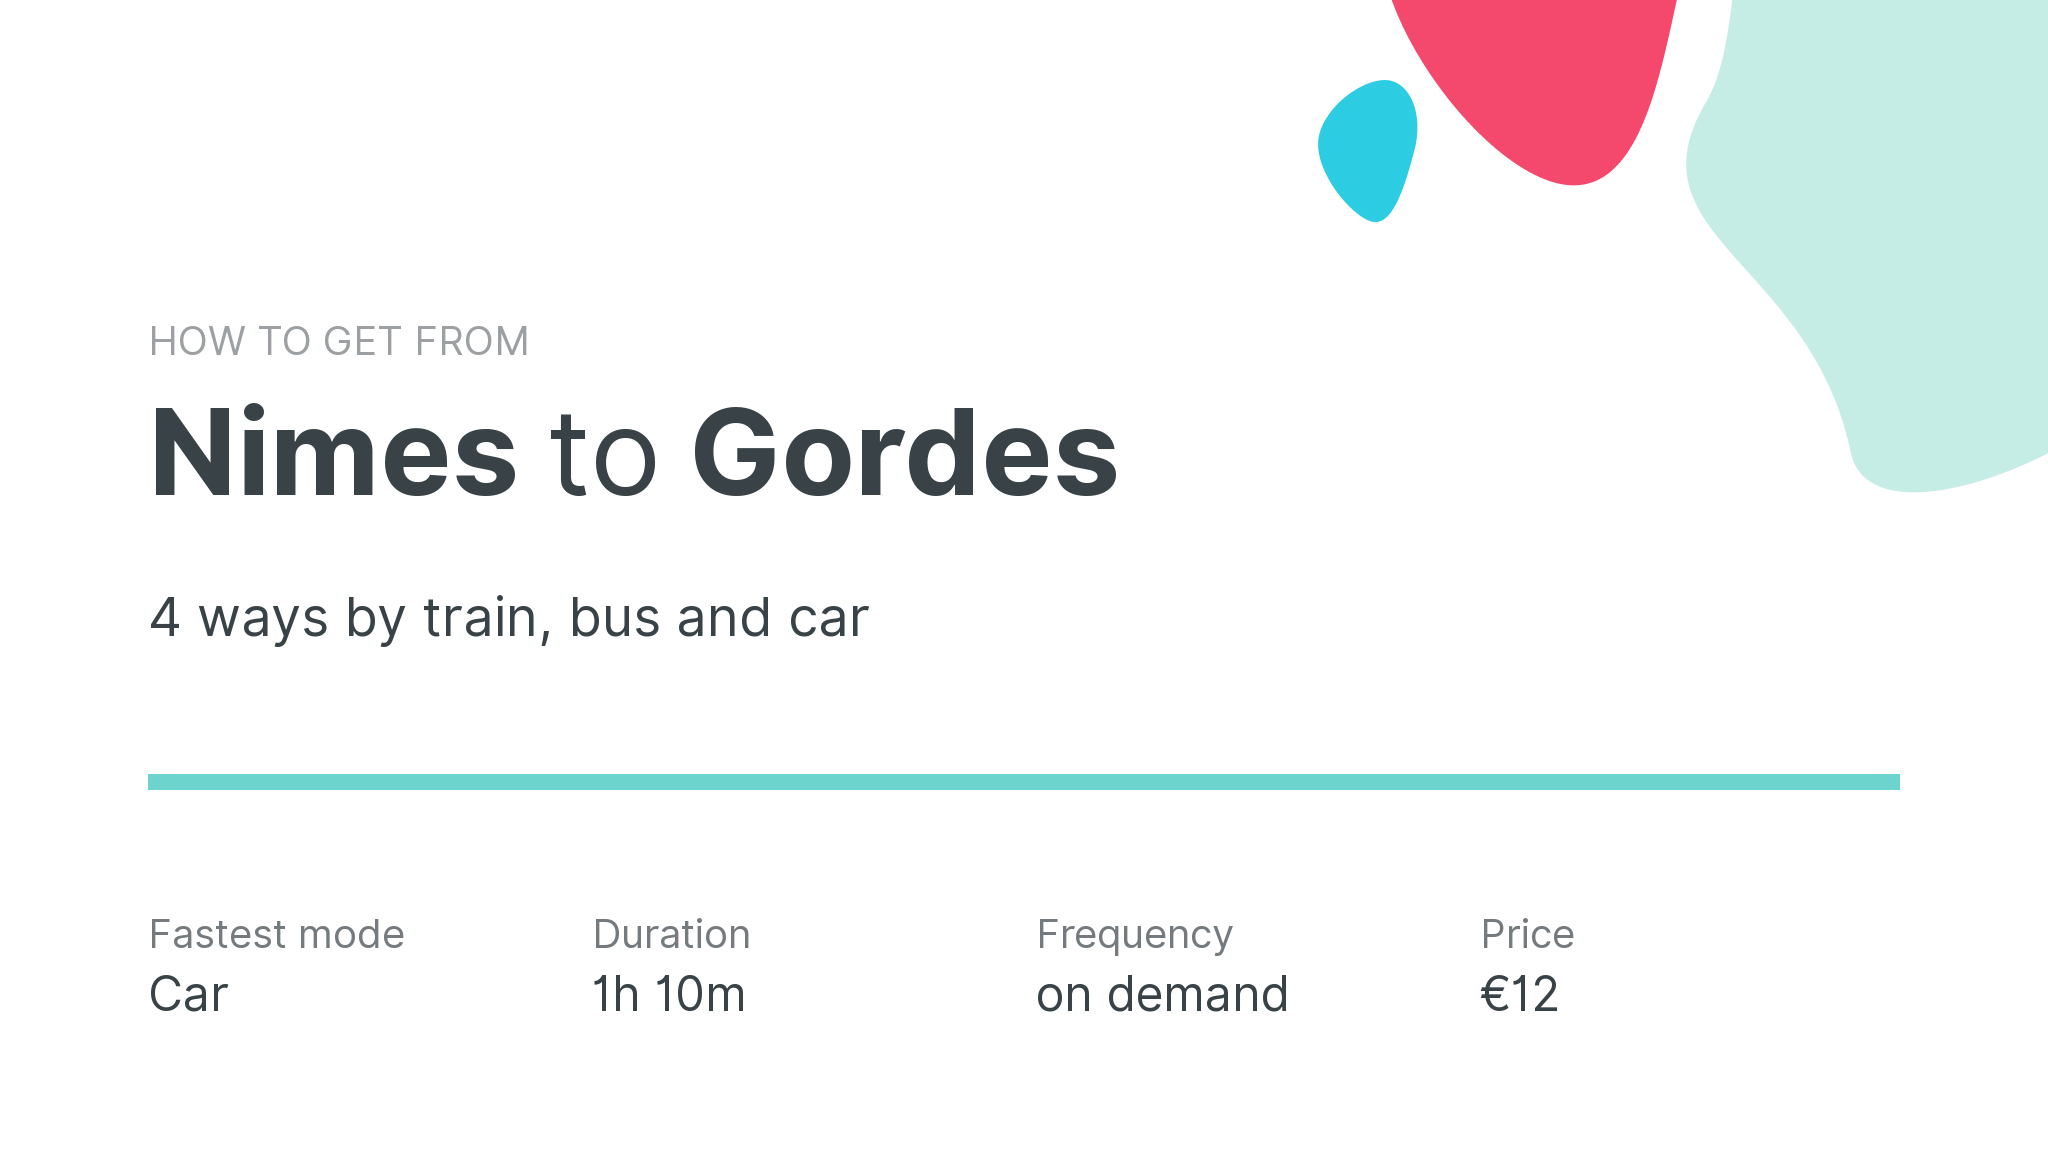 How do I get from Nimes to Gordes